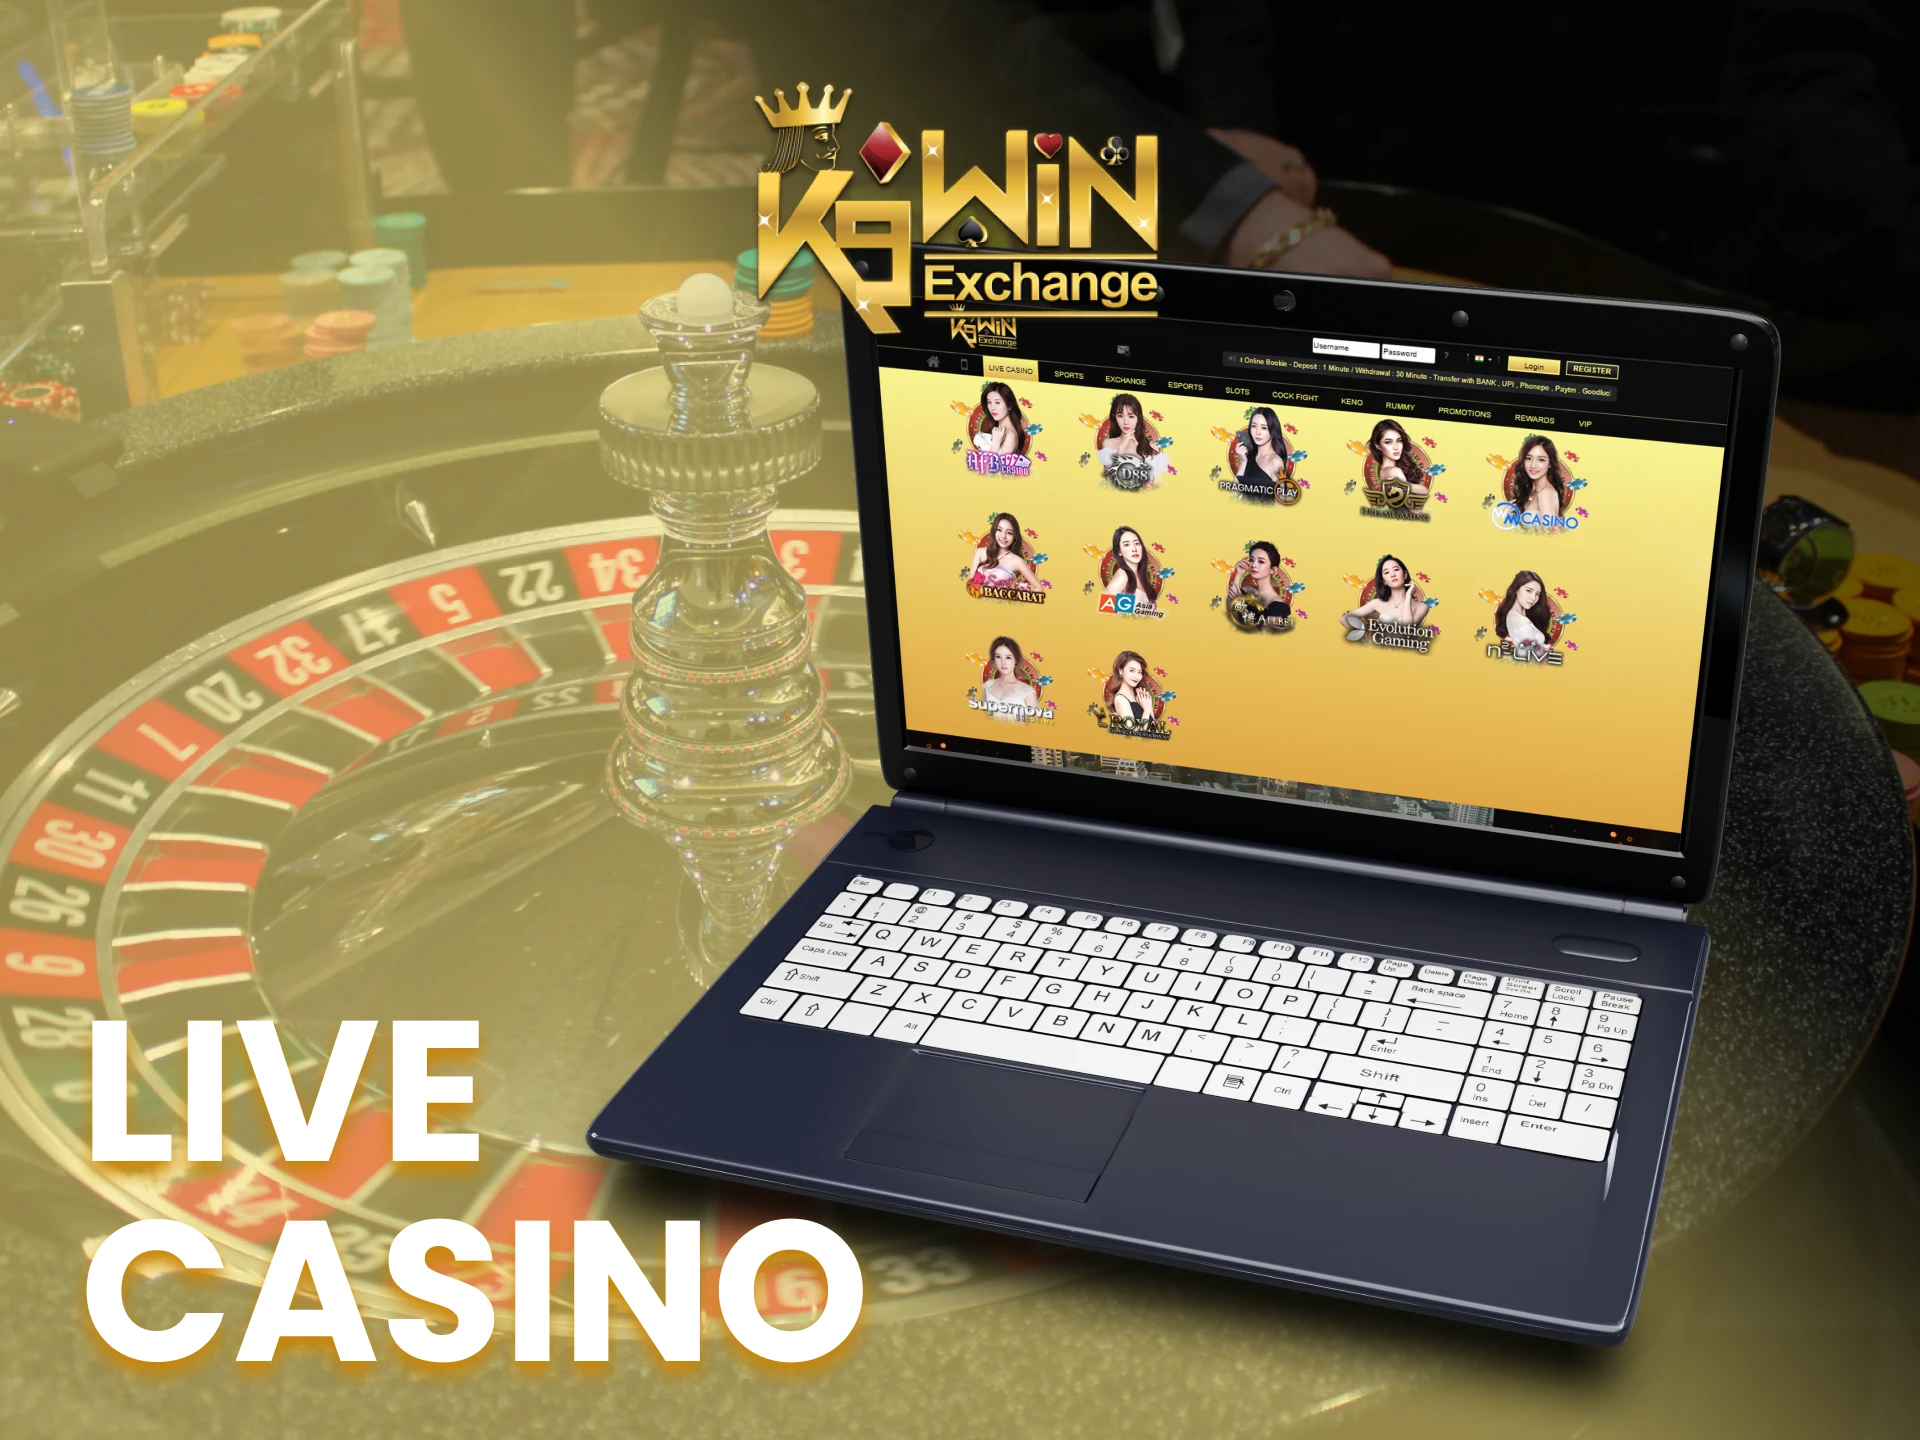 Play the K9Win casino games with real people.